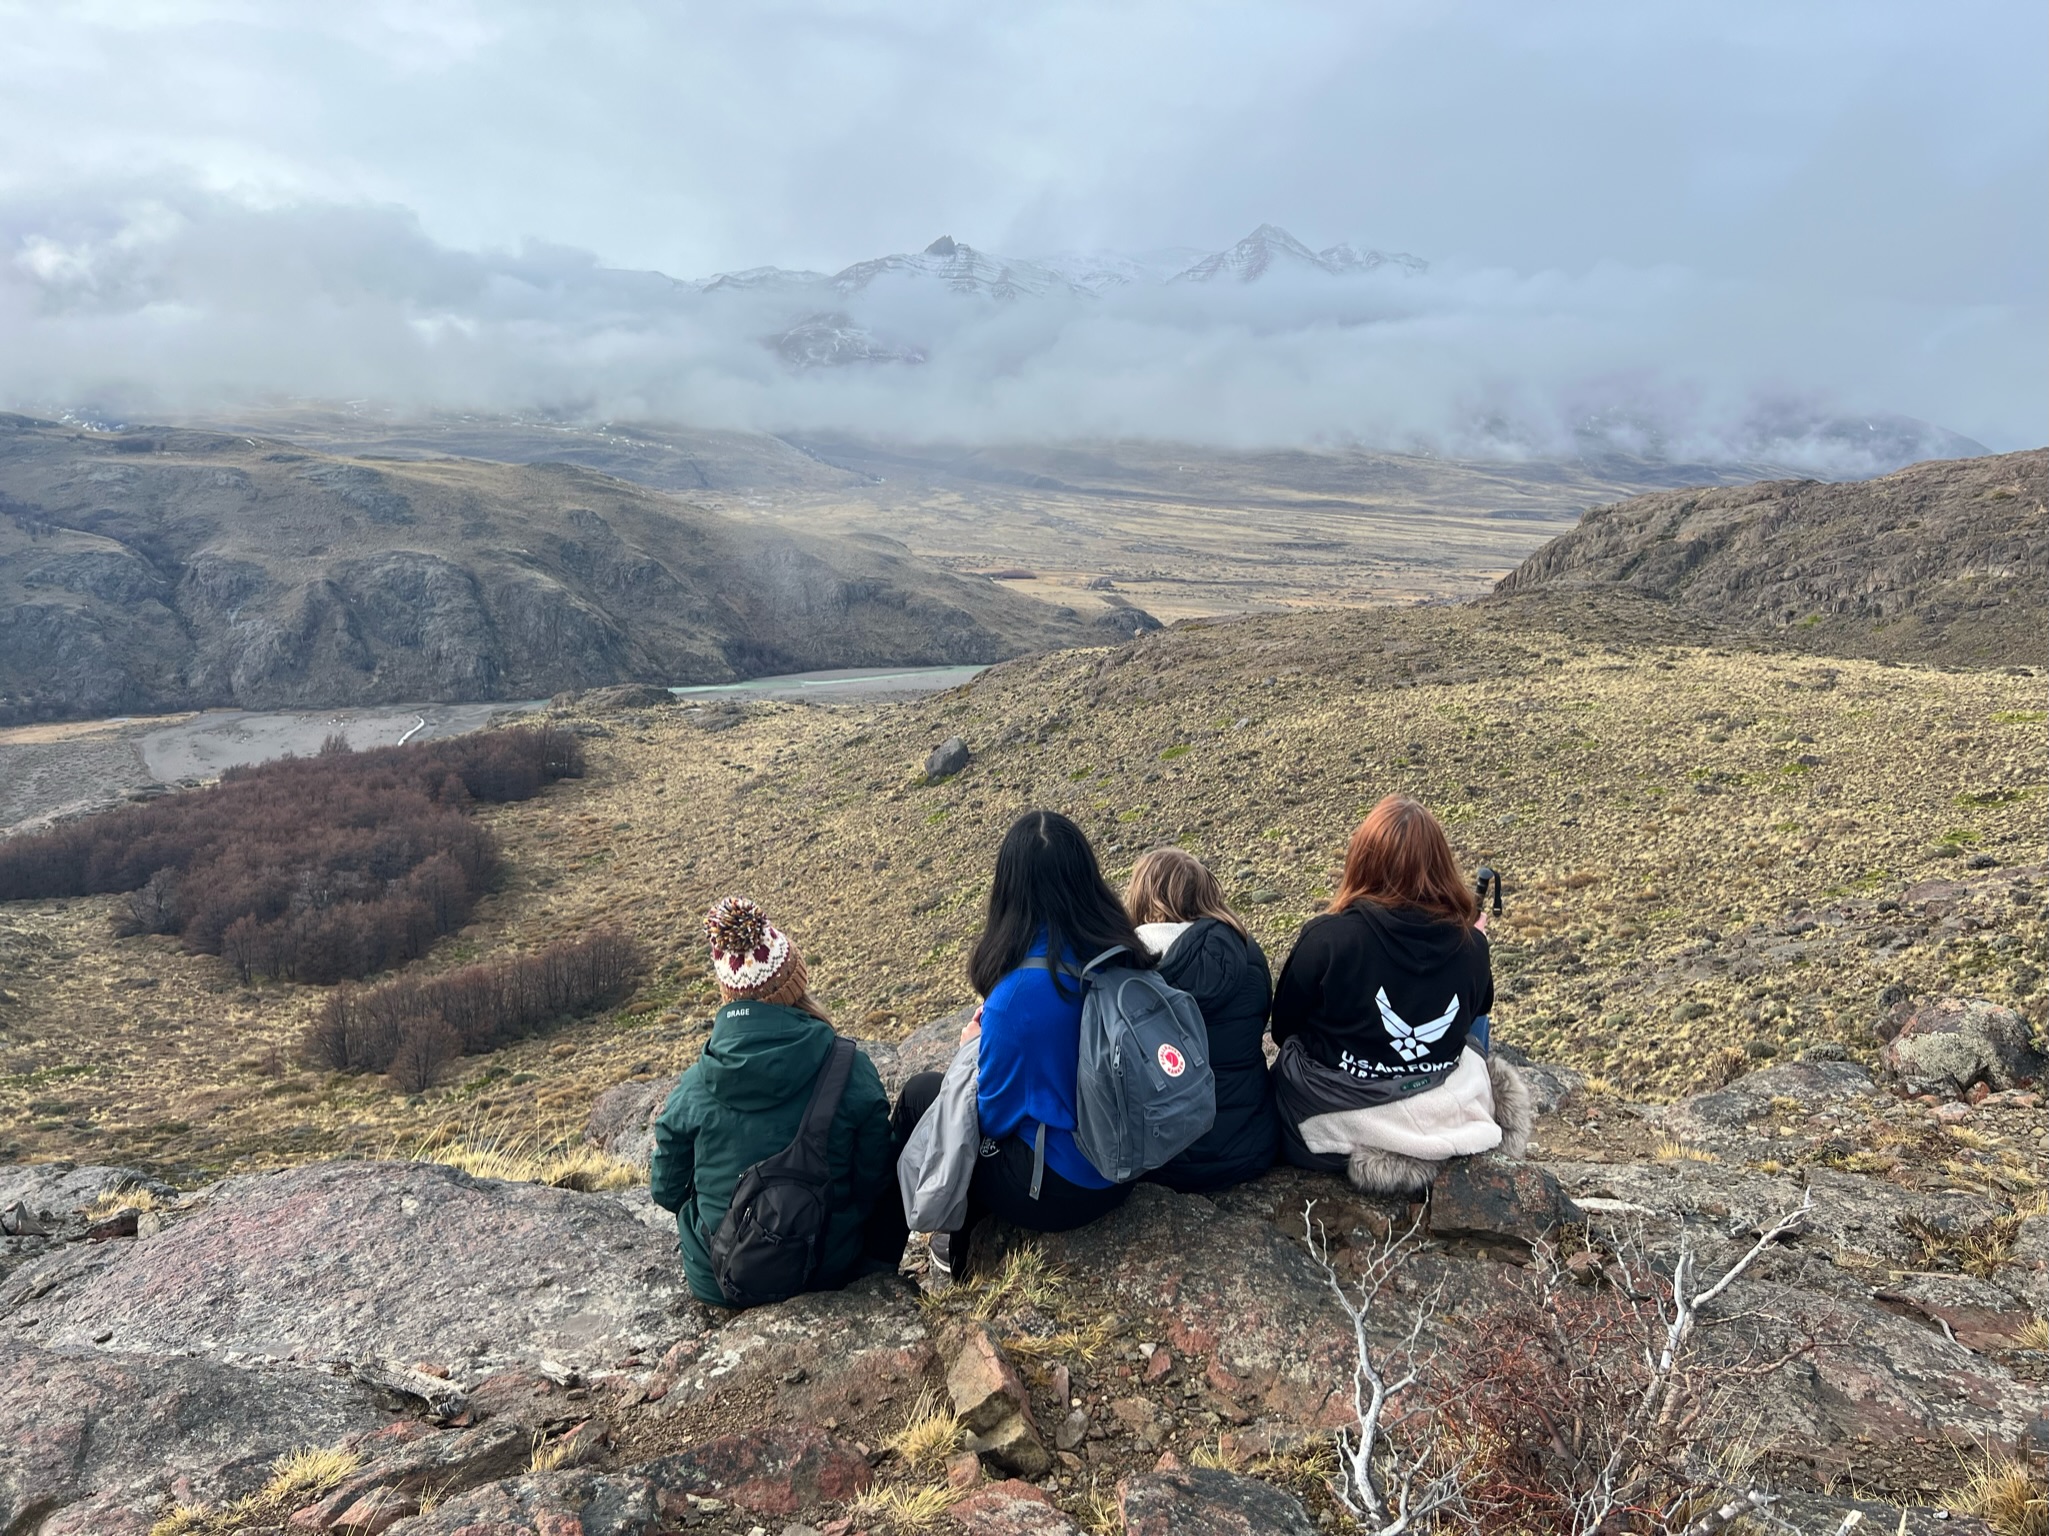 At the peak of the vulture viewpoint in El Chalten in Patagonia!